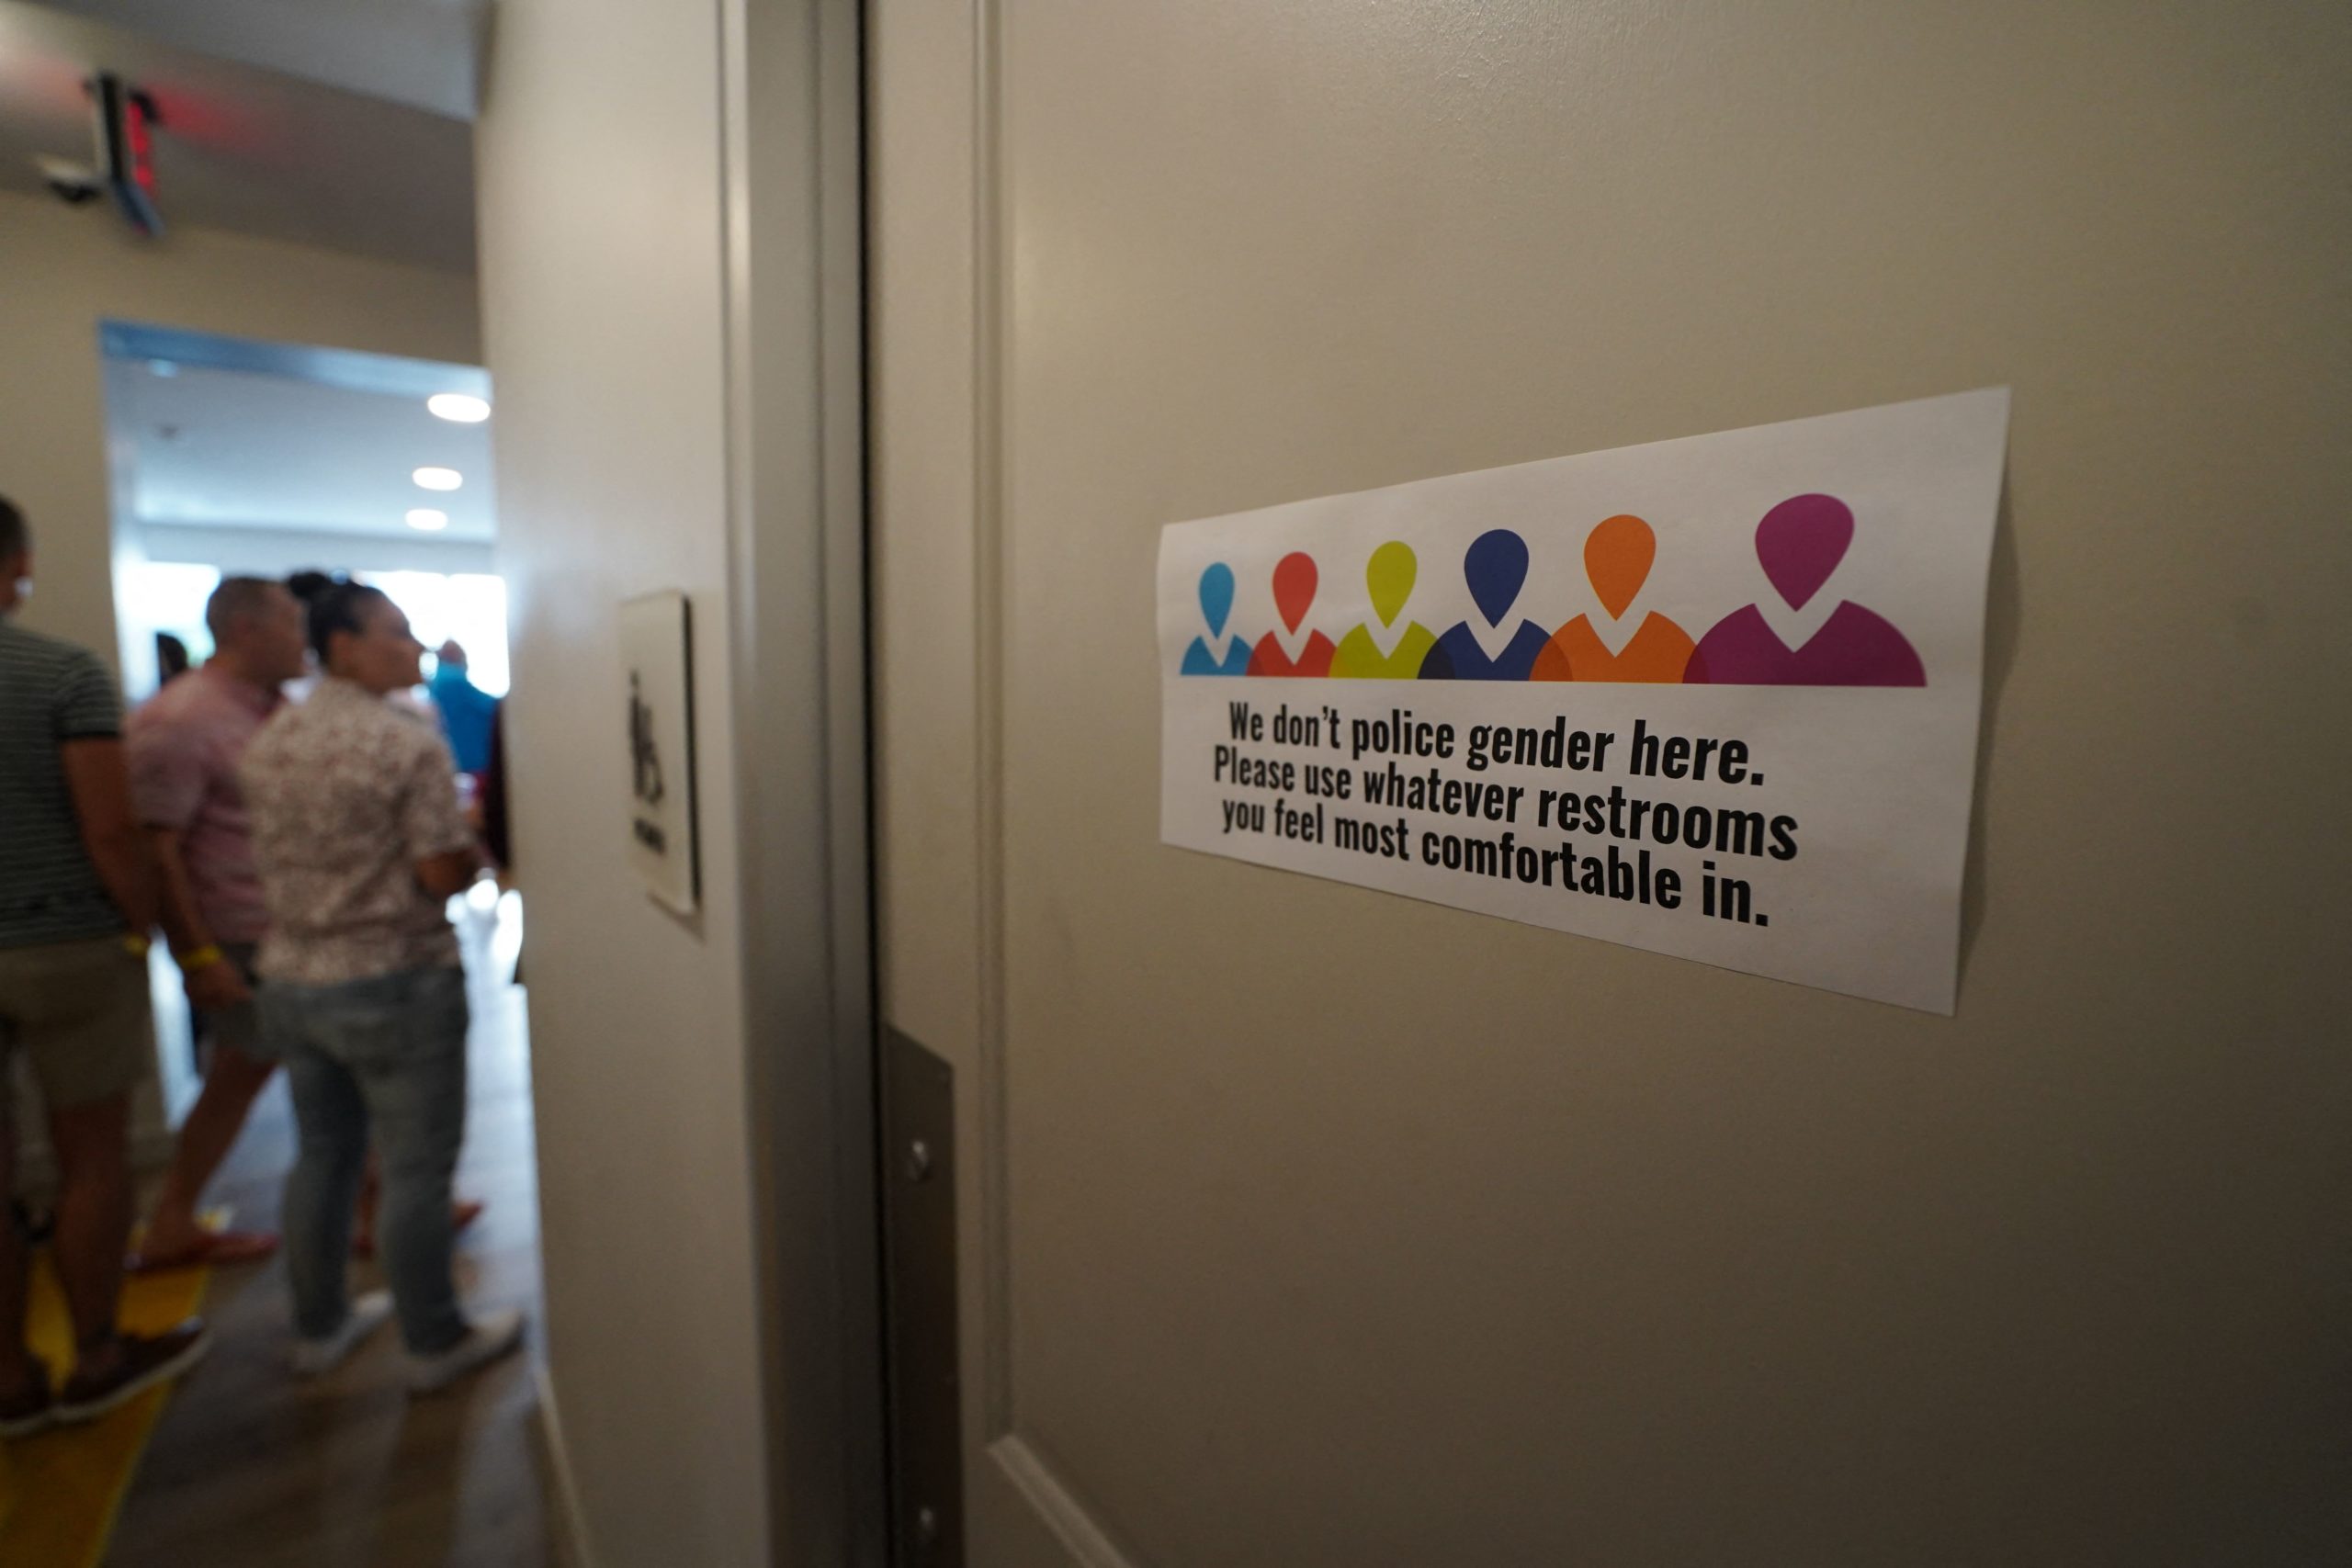 A bathroom sign is seen during the opening the Law Harrington Senior Living Center, the largest LGBTQ senior residence in the US in Houston, Texas on June 24, 2021. - Life has thrown a lot of roadblocks at Dina Jacobs, a transgender woman, for trying to live authentically. But now, she can finally see the light at the end of the tunnel. "Look, everything comes through eventually. Five million no's and one yes, and this is it. This is my yes!" says Jacobs, who spent her 57-year career on stage as a drag performer. Jacobs, a Hawaiian native, is showing a reporter the modest one-bedroom apartment she is now able to rent for less than $500 a month in the first residence in the southern United States exclusively for LGBTQ (lesbian, gay, bisexual, transgender and queer) people. (Photo by Francois PICARD / AFP) (Photo by FRANCOIS PICARD/AFP via Getty Images)